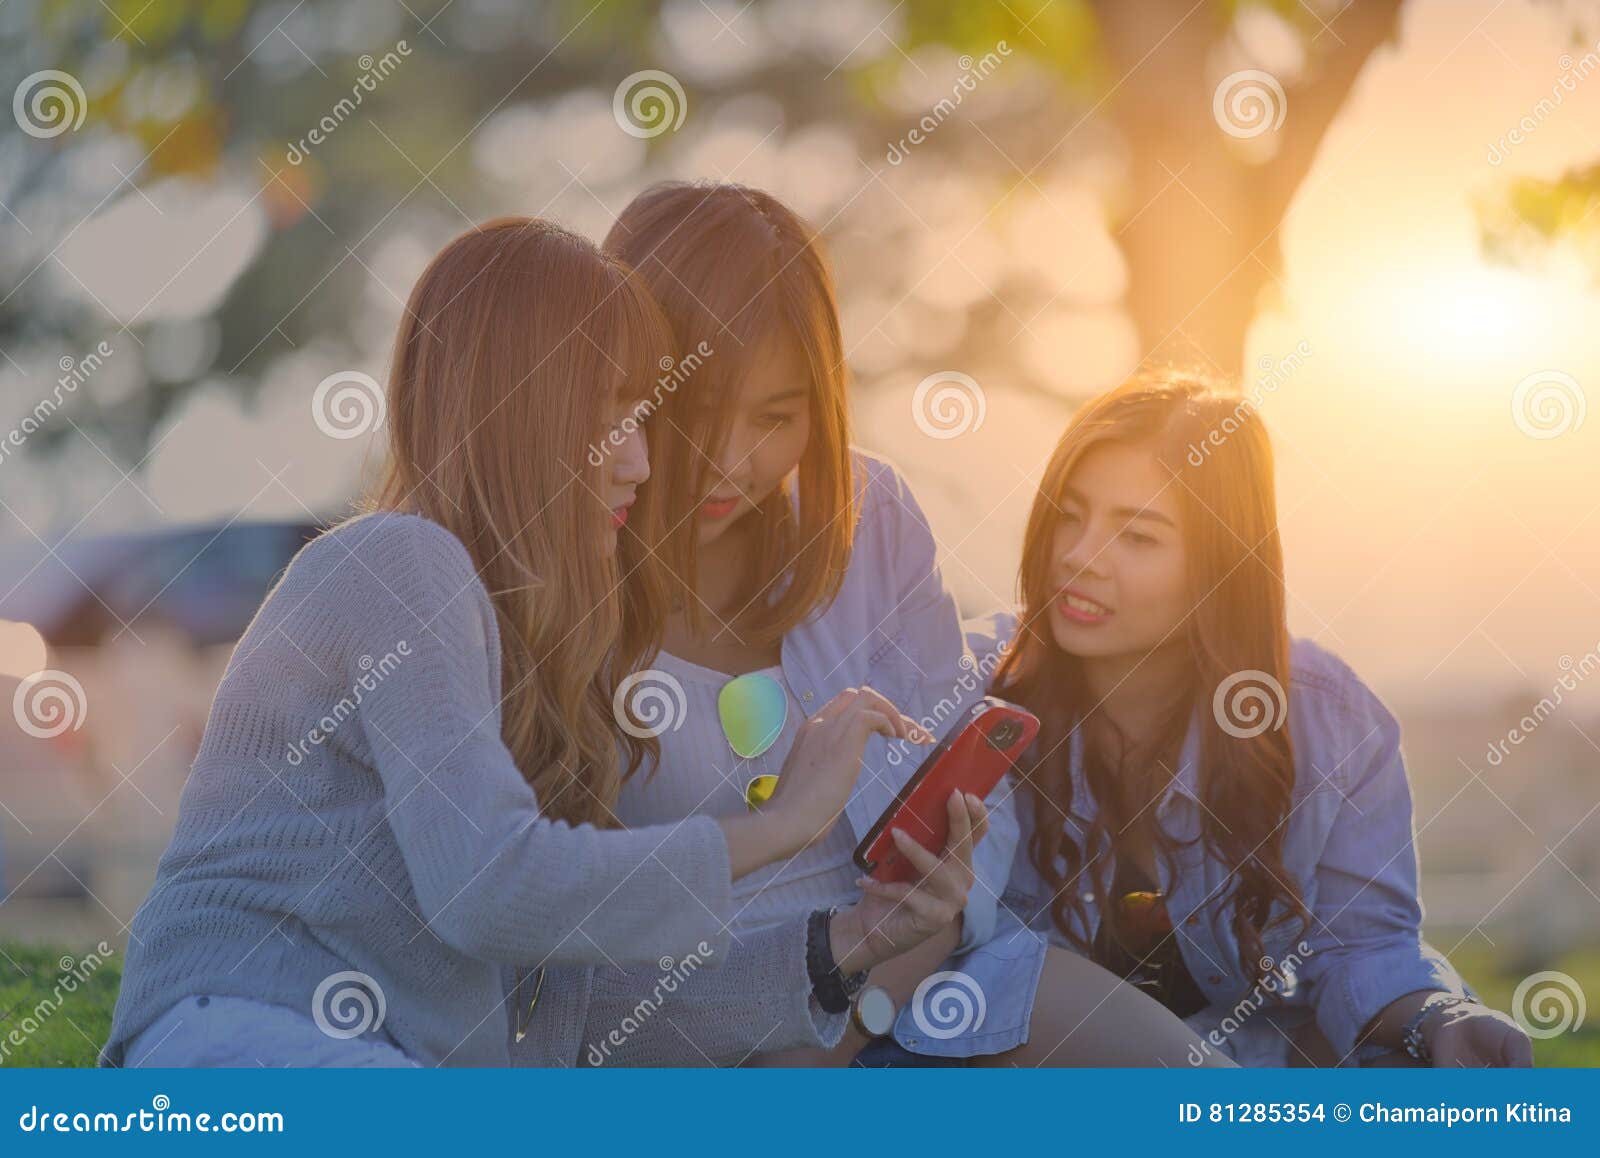 Three Young Women Looking in Mobile Phone. Swag Teen Girls ...